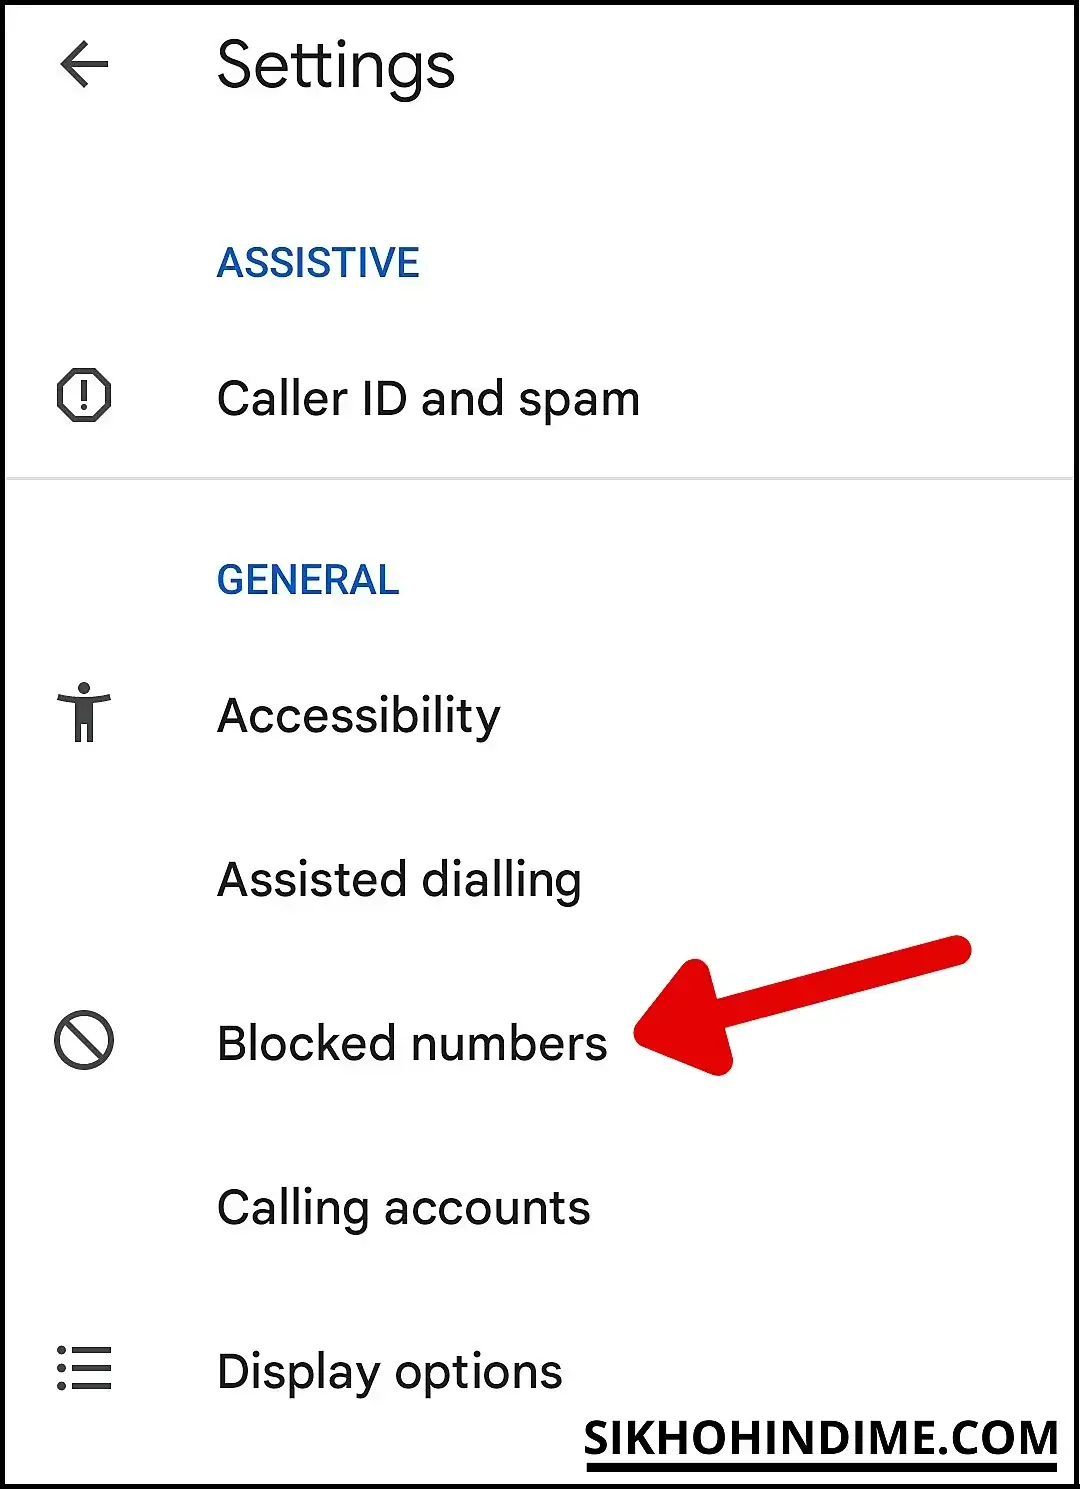 Click on blocked numbers